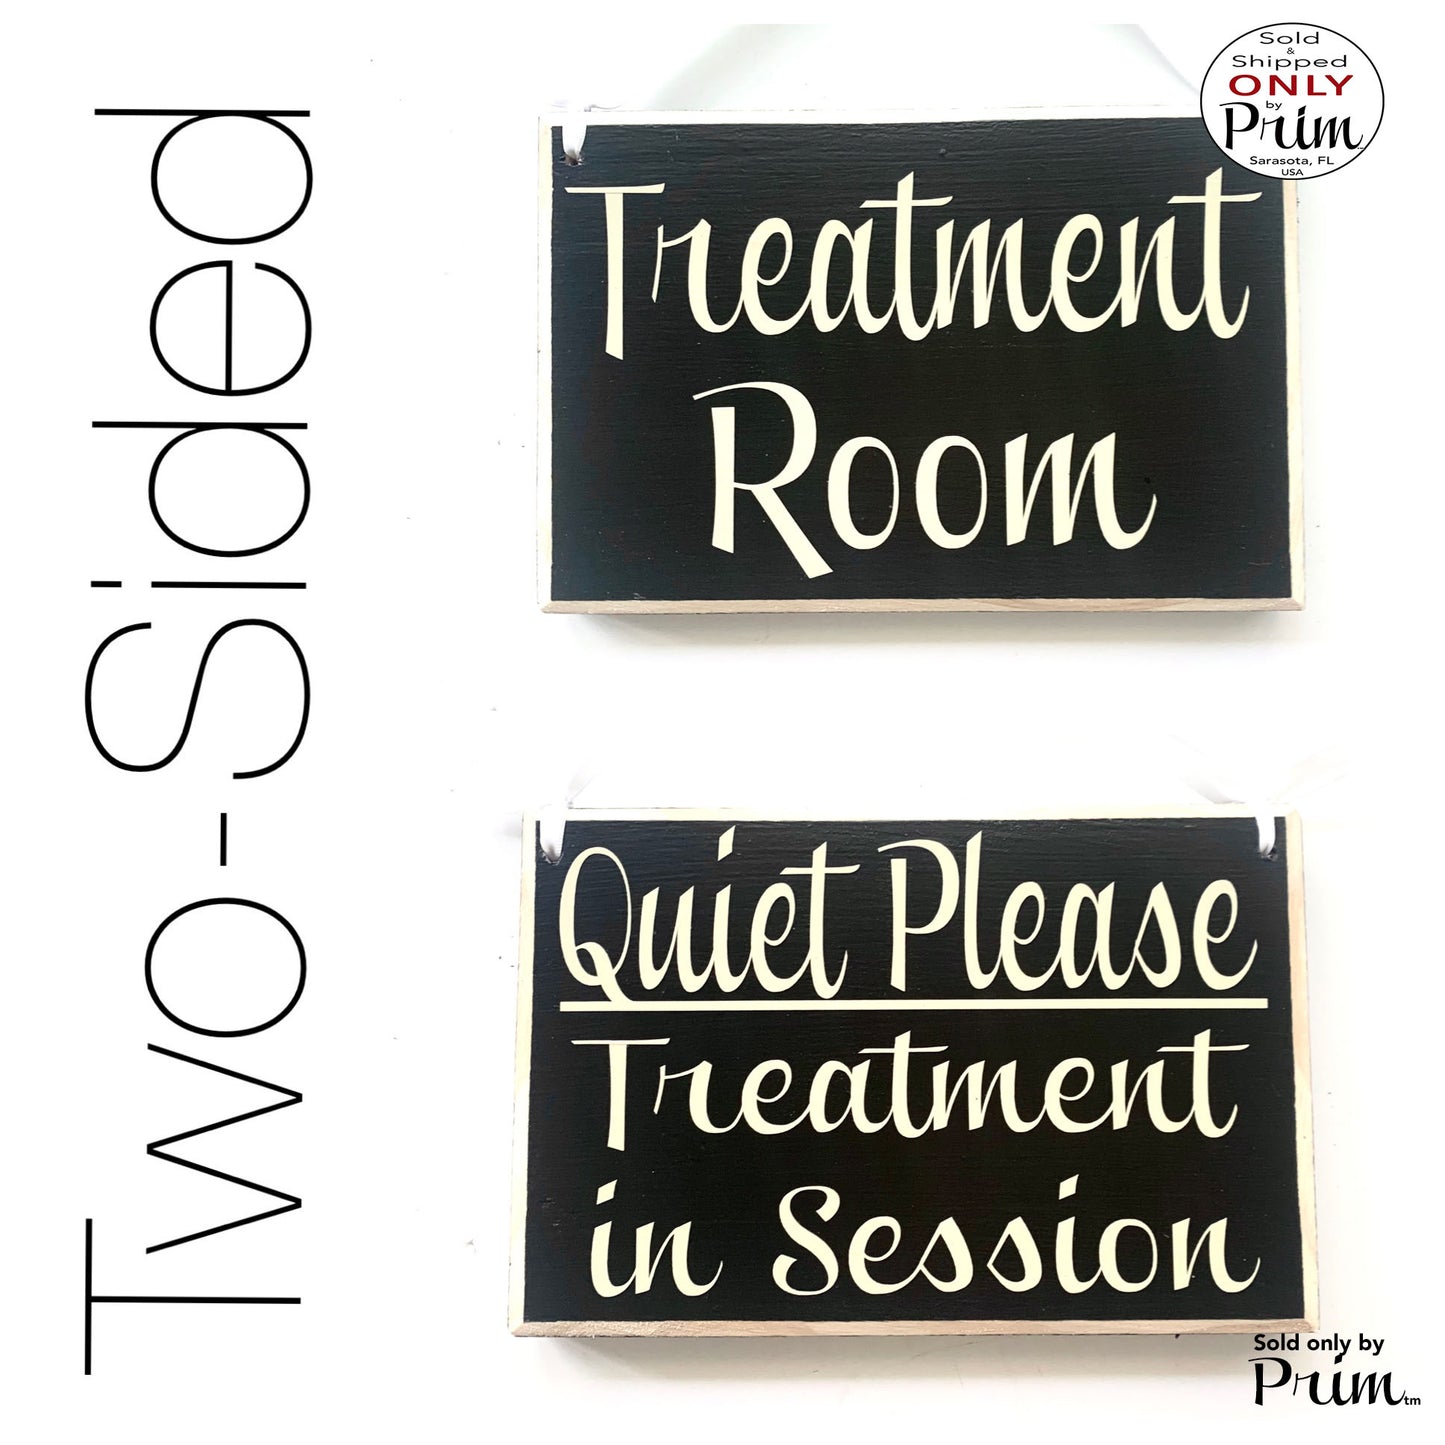 8x6 Treatment Room Quiet Please Treatment In Session Custom Wood Sign | Progress Office Business Salon Medical Clinic Plaque Do Not Disturb Designs by Prim